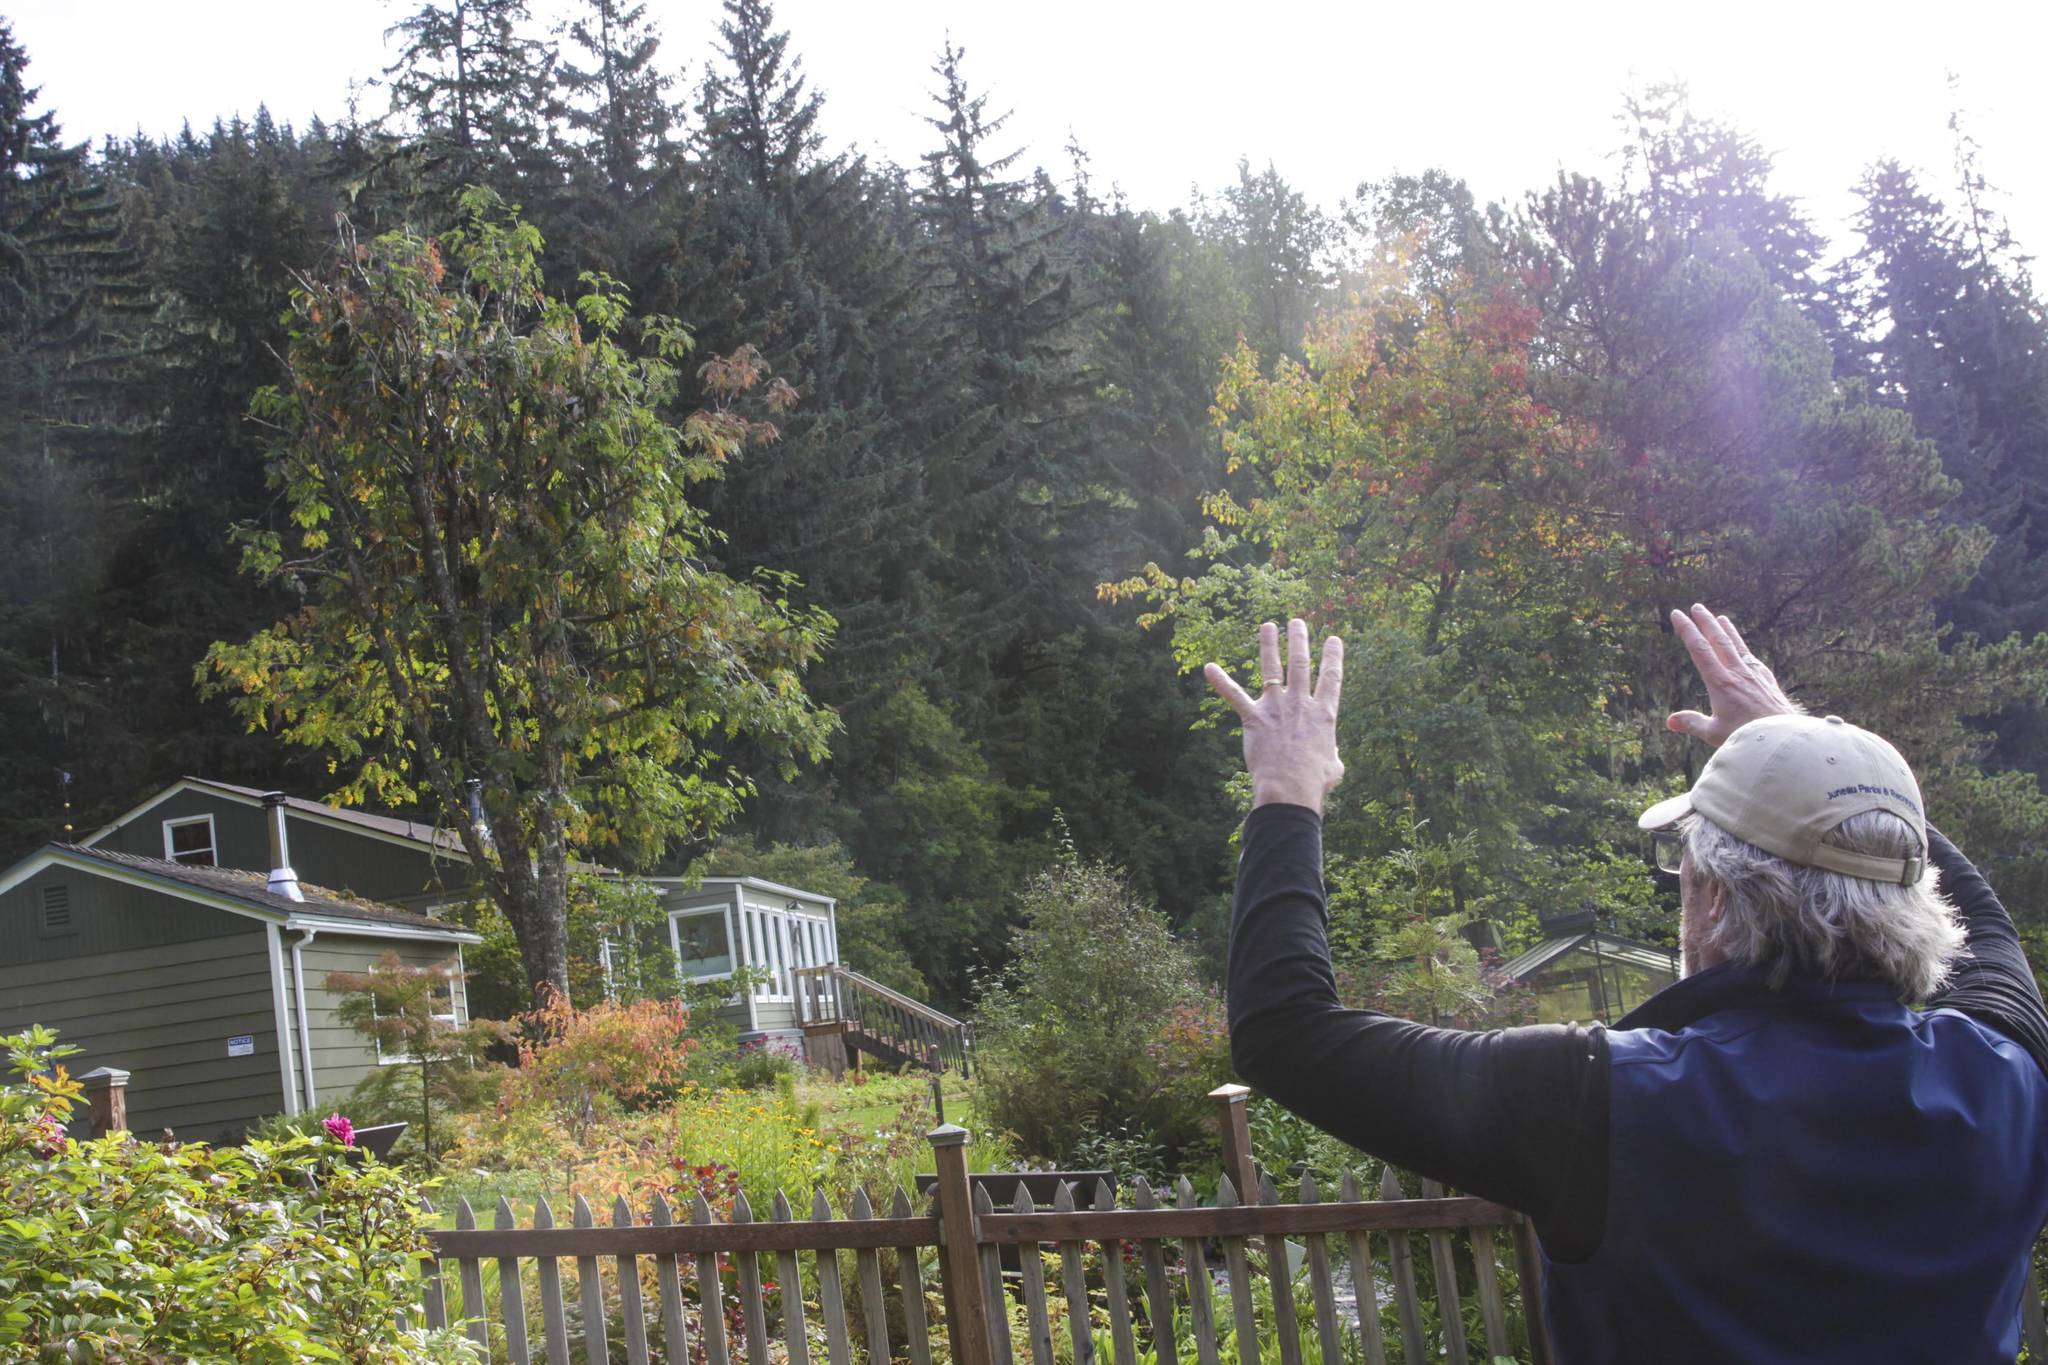 Jensen-Olson Arboretum’s long term manager, Merrill Jensen, is retiring after 13 years guiding and shaping the space. (Michael S. Lockett / Juneau Empire)